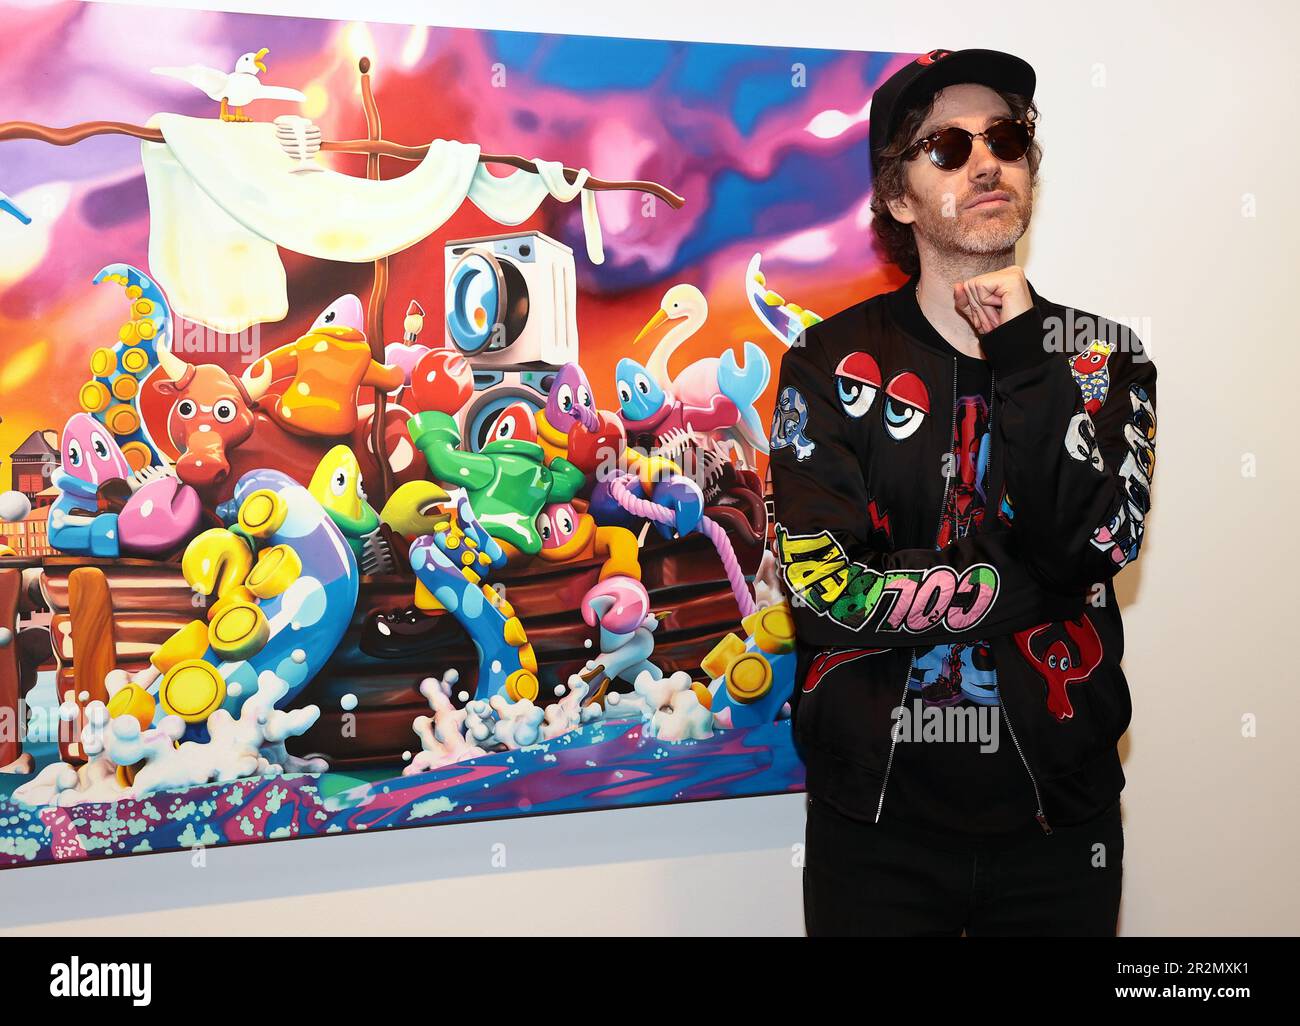 VENICE, ITALY - MAY 20: British artist Philip Colbert pose for a portrait alongside works on display at the 'Patricia Low Venice' Art Gallery during the 18th International Architecture Exhibition on May 20, 2023 in Venice, Italy. Credit: Matteo Chinellato/Alamy Live News Stock Photo